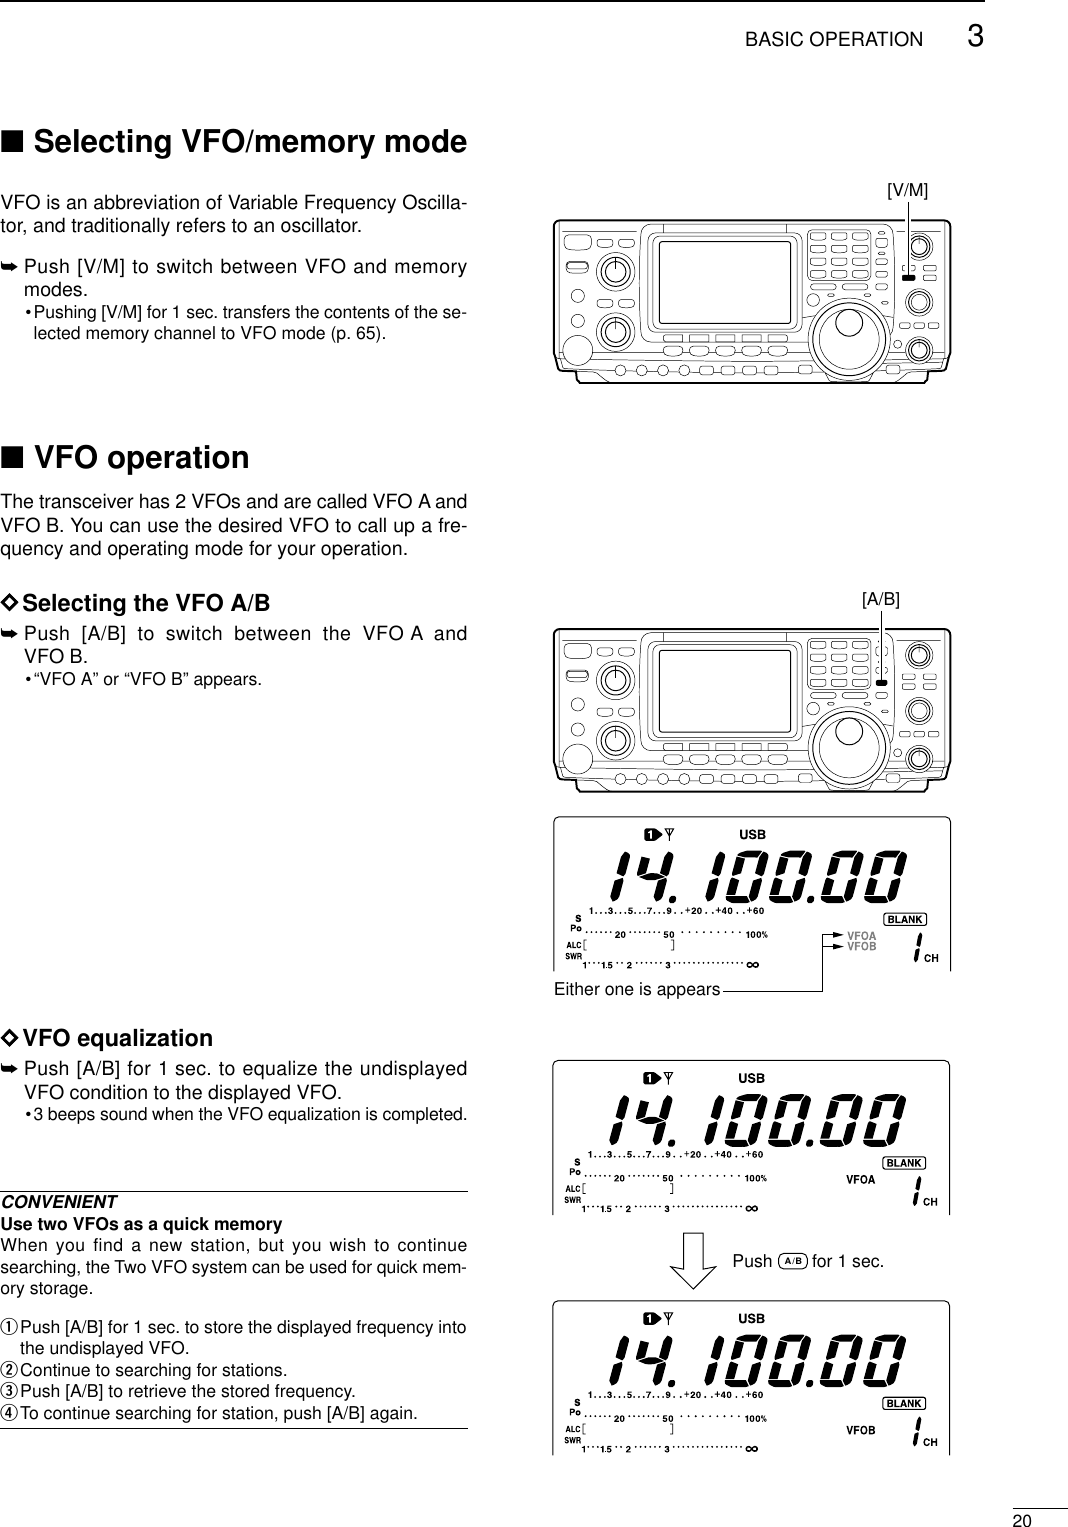 203BASIC OPERATION■Selecting VFO/memory mode VFO is an abbreviation of Variable Frequency Oscilla-tor, and traditionally refers to an oscillator.➥Push [V/M] to switch between VFO and memorymodes.•Pushing [V/M] for 1 sec. transfers the contents of the se-lected memory channel to VFO mode (p. 65).■VFO operationThe transceiver has 2 VFOs and are called VFO A andVFO B. You can use the desired VFO to call up a fre-quency and operating mode for your operation.DSelecting the VFO A/B➥Push [A/B] to switch between the VFO A andVFO B.•“VFO A” or “VFO B” appears.DVFO equalization➥Push [A/B] for 1 sec. to equalize the undisplayedVFO condition to the displayed VFO.•3 beeps sound when the VFO equalization is completed.CONVENIENTUse two VFOs as a quick memoryWhen you find a new station, but you wish to continuesearching, the Two VFO system can be used for quick mem-ory storage.qPush [A/B] for 1 sec. to store the displayed frequency intothe undisplayed VFO.wContinue to searching for stations.ePush [A/B] to retrieve the stored frequency.rTo continue searching for station, push [A/B] again.[A/B]Either one is appearsPush        for 1 sec.A/B[V/M]